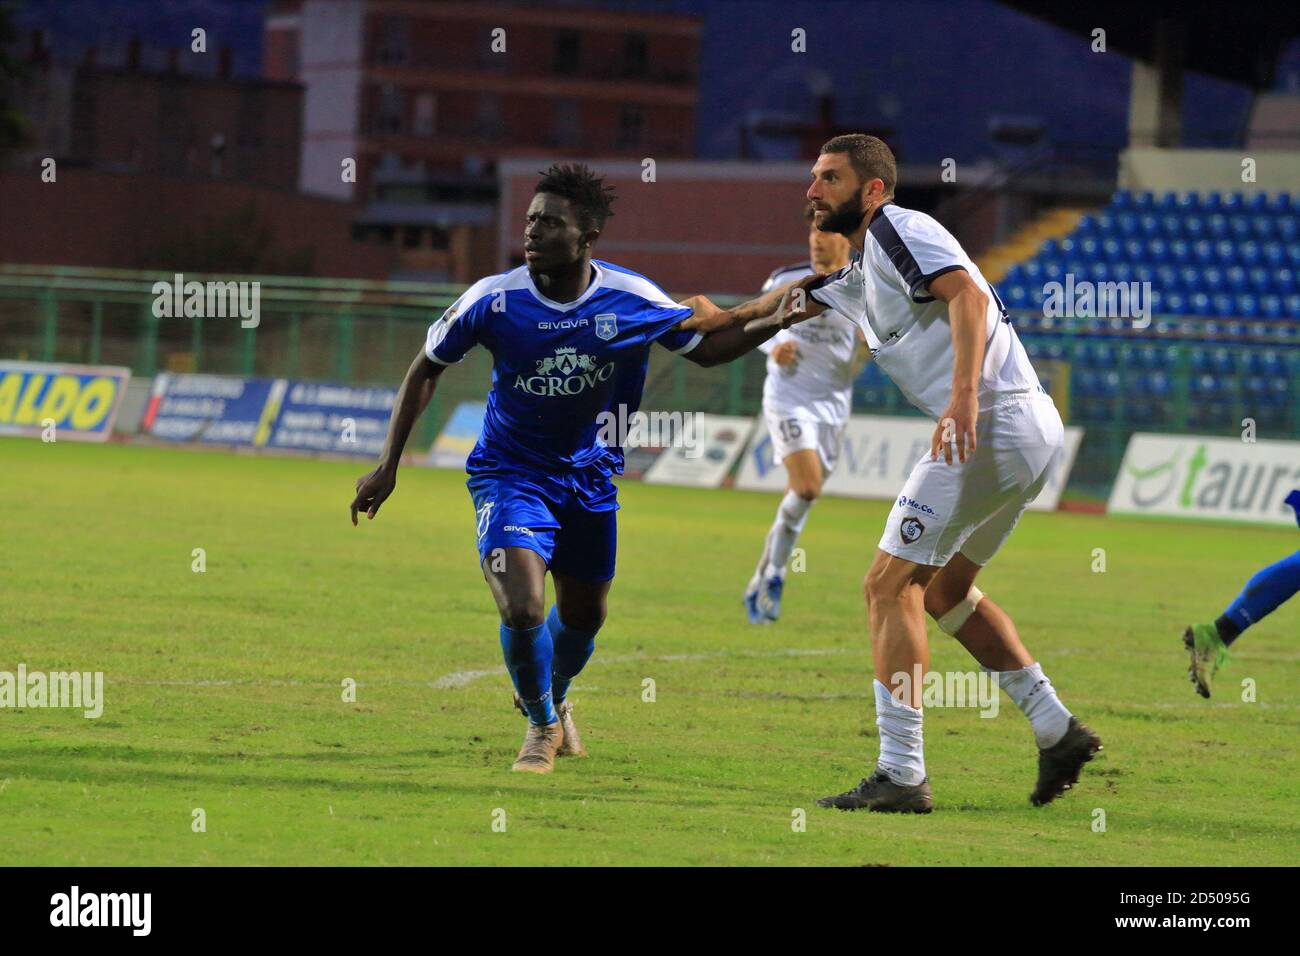 League Pro , Group C , Day 4th . Stadium 'Marcello Torre' . Paganese - Cavese 0 -0Abou Diop n.11 Paganese Ciro De Franco,n .27 Cavese (Photo by Pasquale Senatore / Pacific Press/Sipa USA) Stock Photo